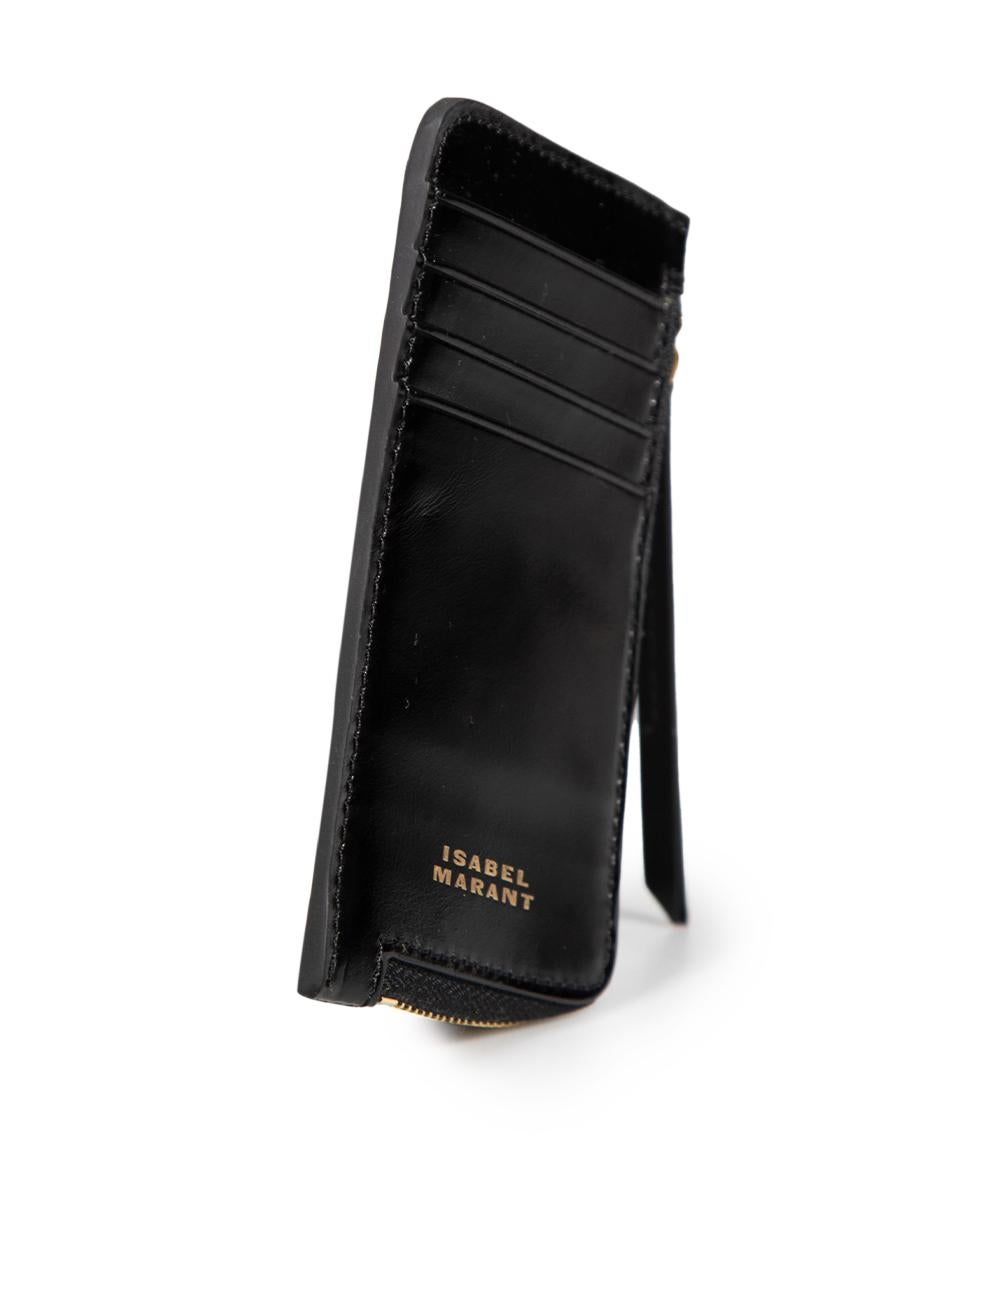 CONDITION is Very good. Hardly any visible wear to the card holder is evident on this used Isabel Marant designer resale item. This item comes with an original dust bag.
 
 
 
 Details
 
 
 Model: Kochi
 
 Black
 
 Leather
 
 Card holder
 
 Front